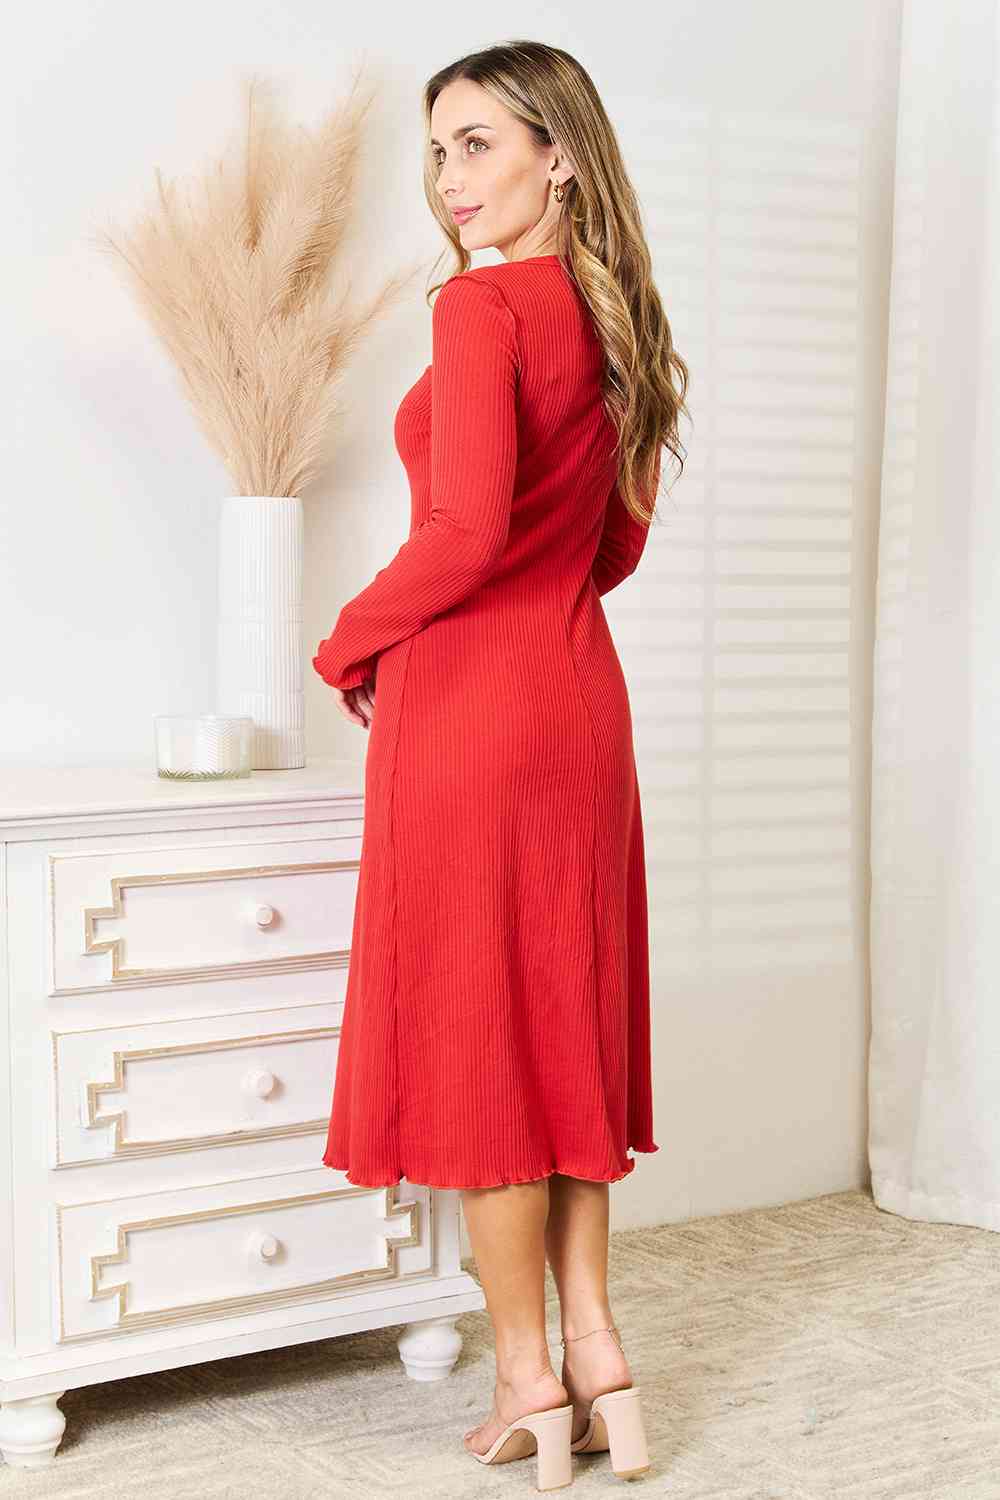 Culture Code Full Size Round Neck Long Sleeve Dress